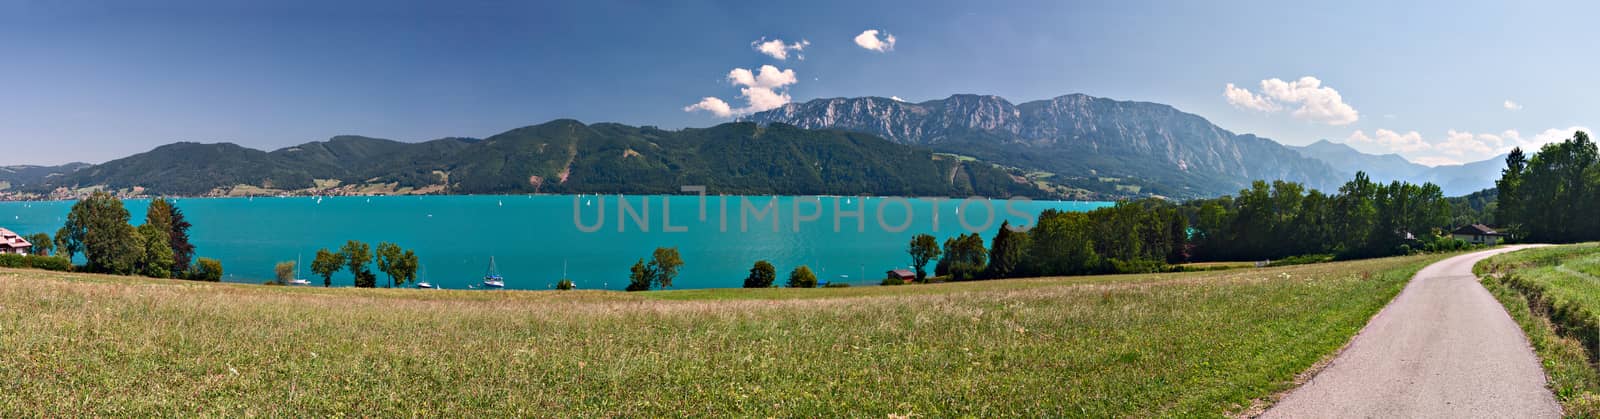 Mondsee lake in the mountains of Austria

 by A-dam